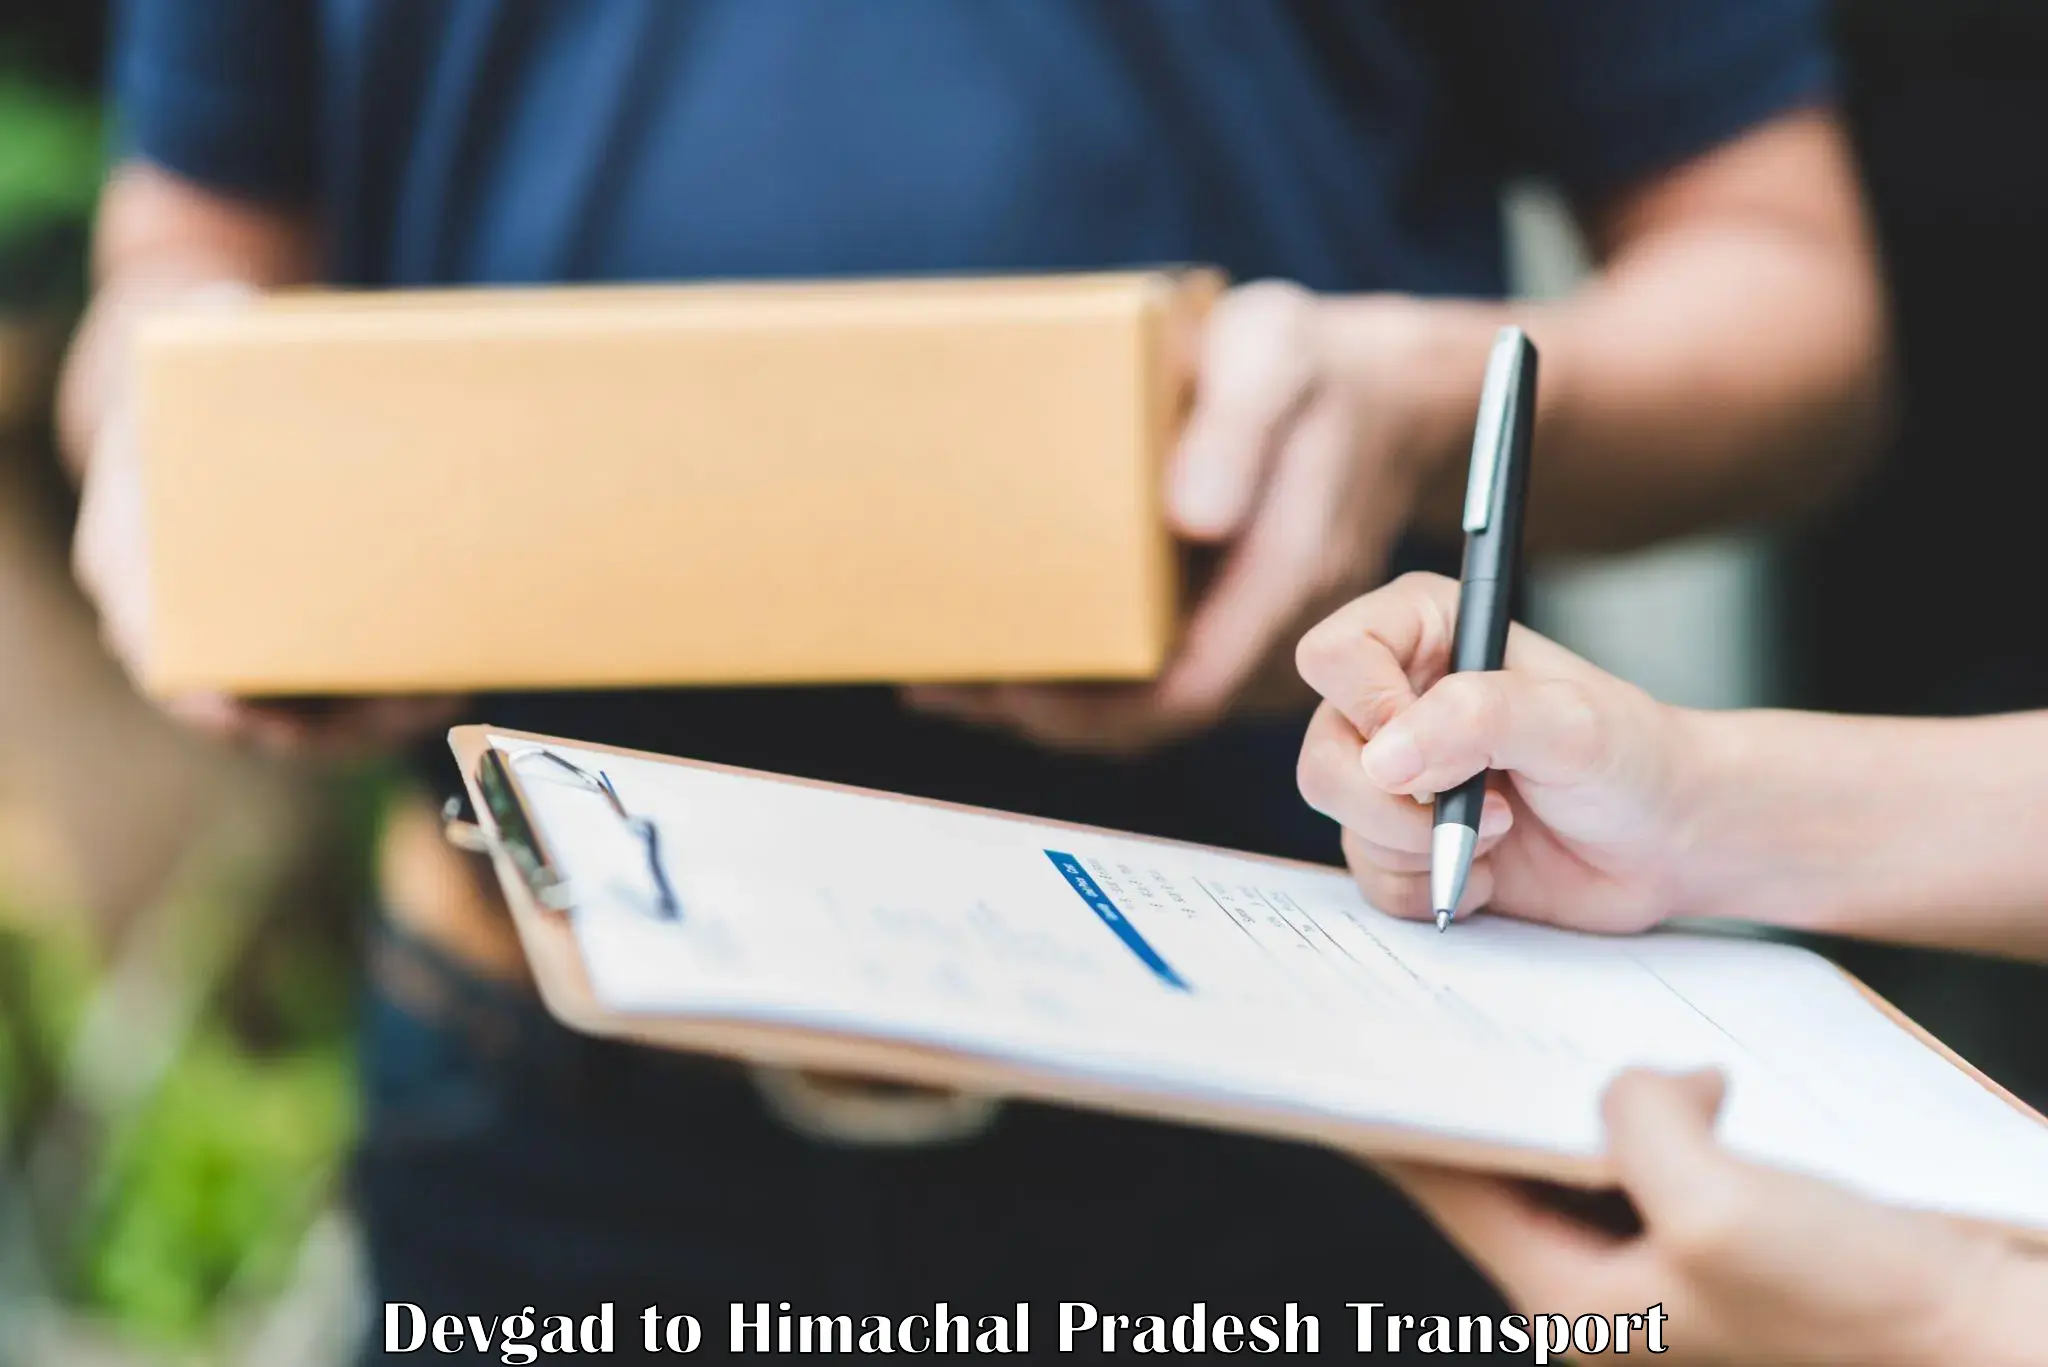 Transport bike from one state to another Devgad to Himachal Pradesh